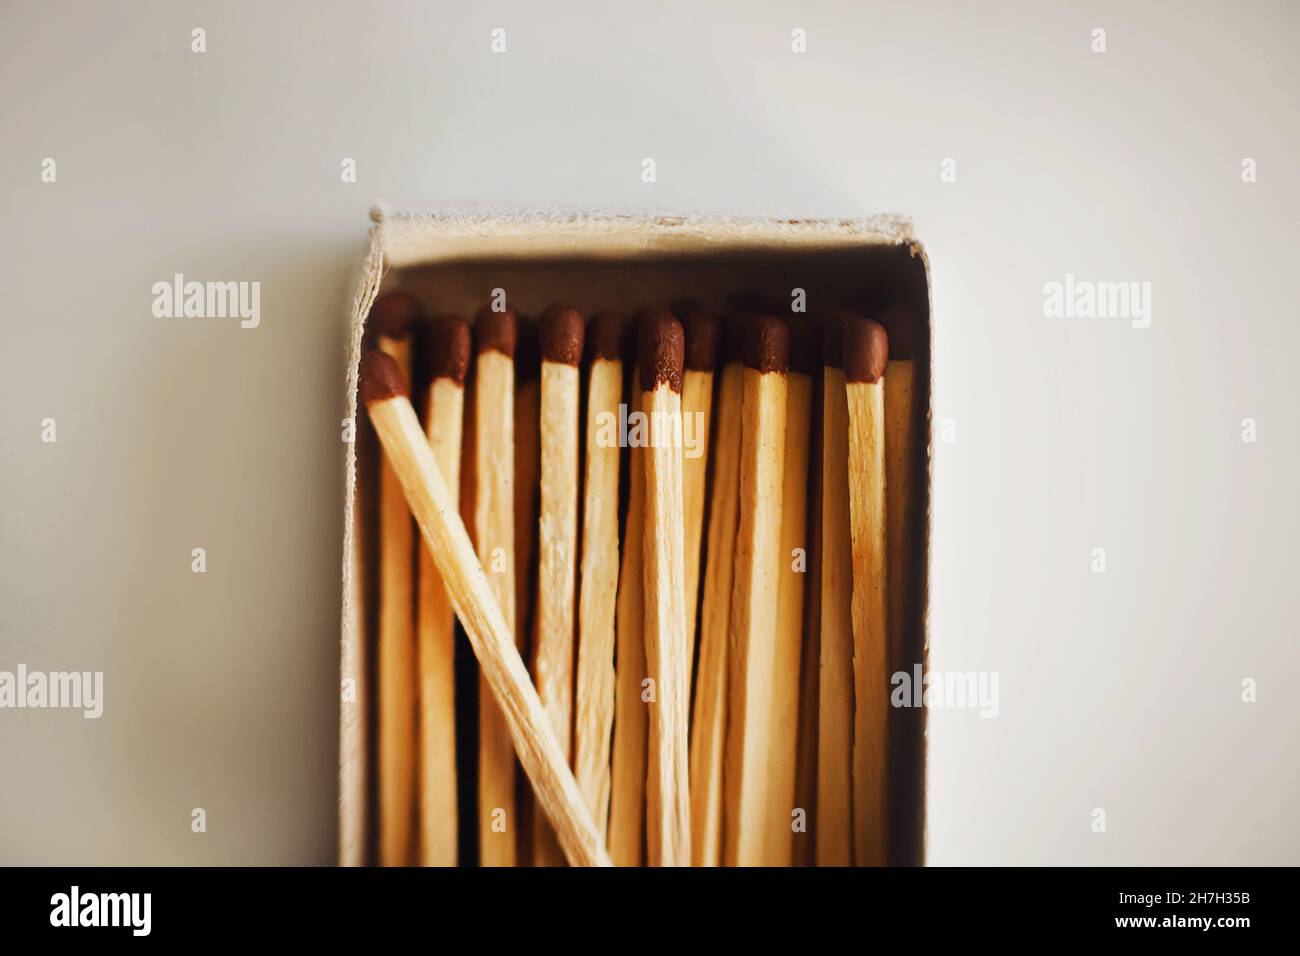 In an open cardboard matchbox lying on a white table, there are wooden matches illuminated by light. Flammable objects. Household items. Stock Photo